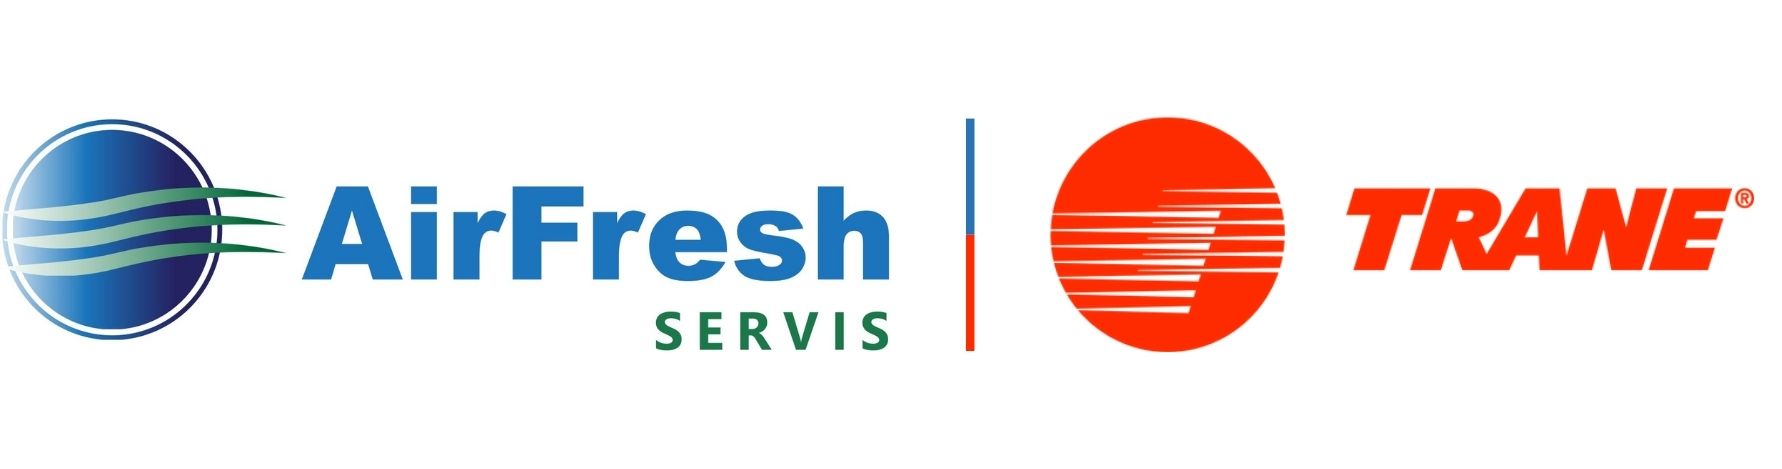 HVAC systems and services – Airfresh